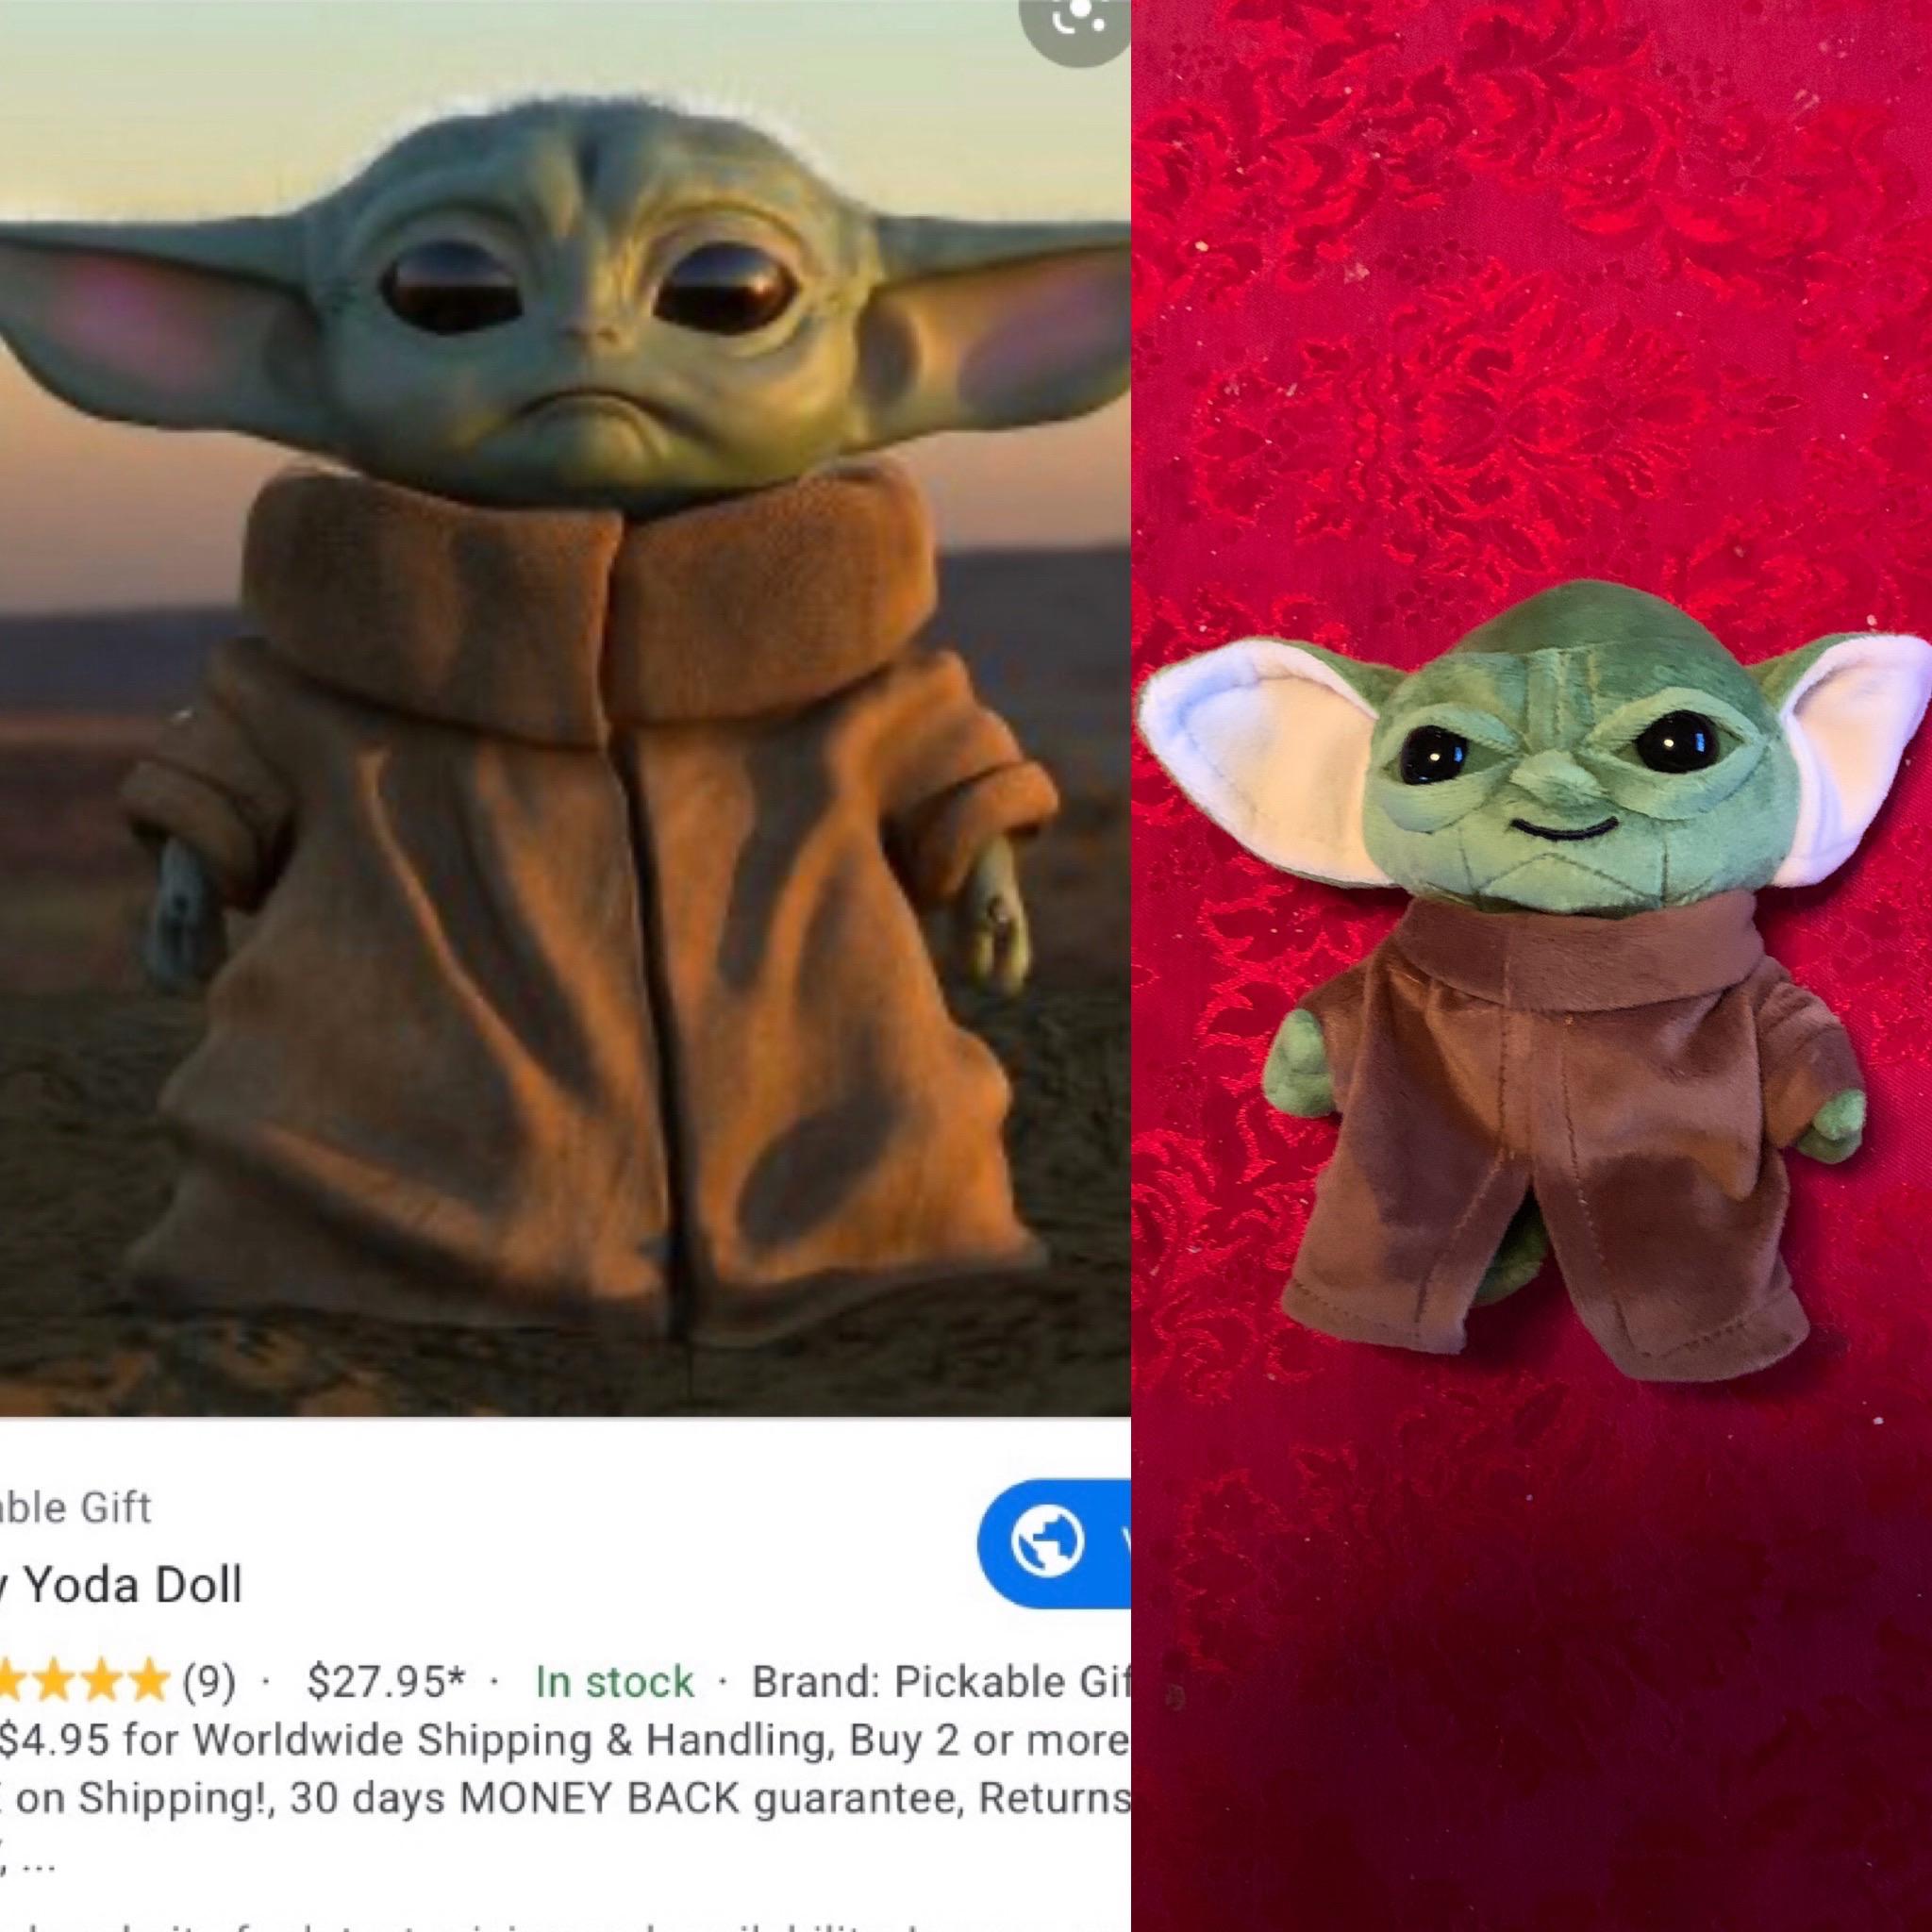 baby yoda doll - ble Gift Yoda Doll 9 $27.95 . In stock. Brand Pickable Gif $4.95 for Worldwide Shipping & Handling, Buy 2 or more on Shipping!, 30 days Money Back guarantee, Returns